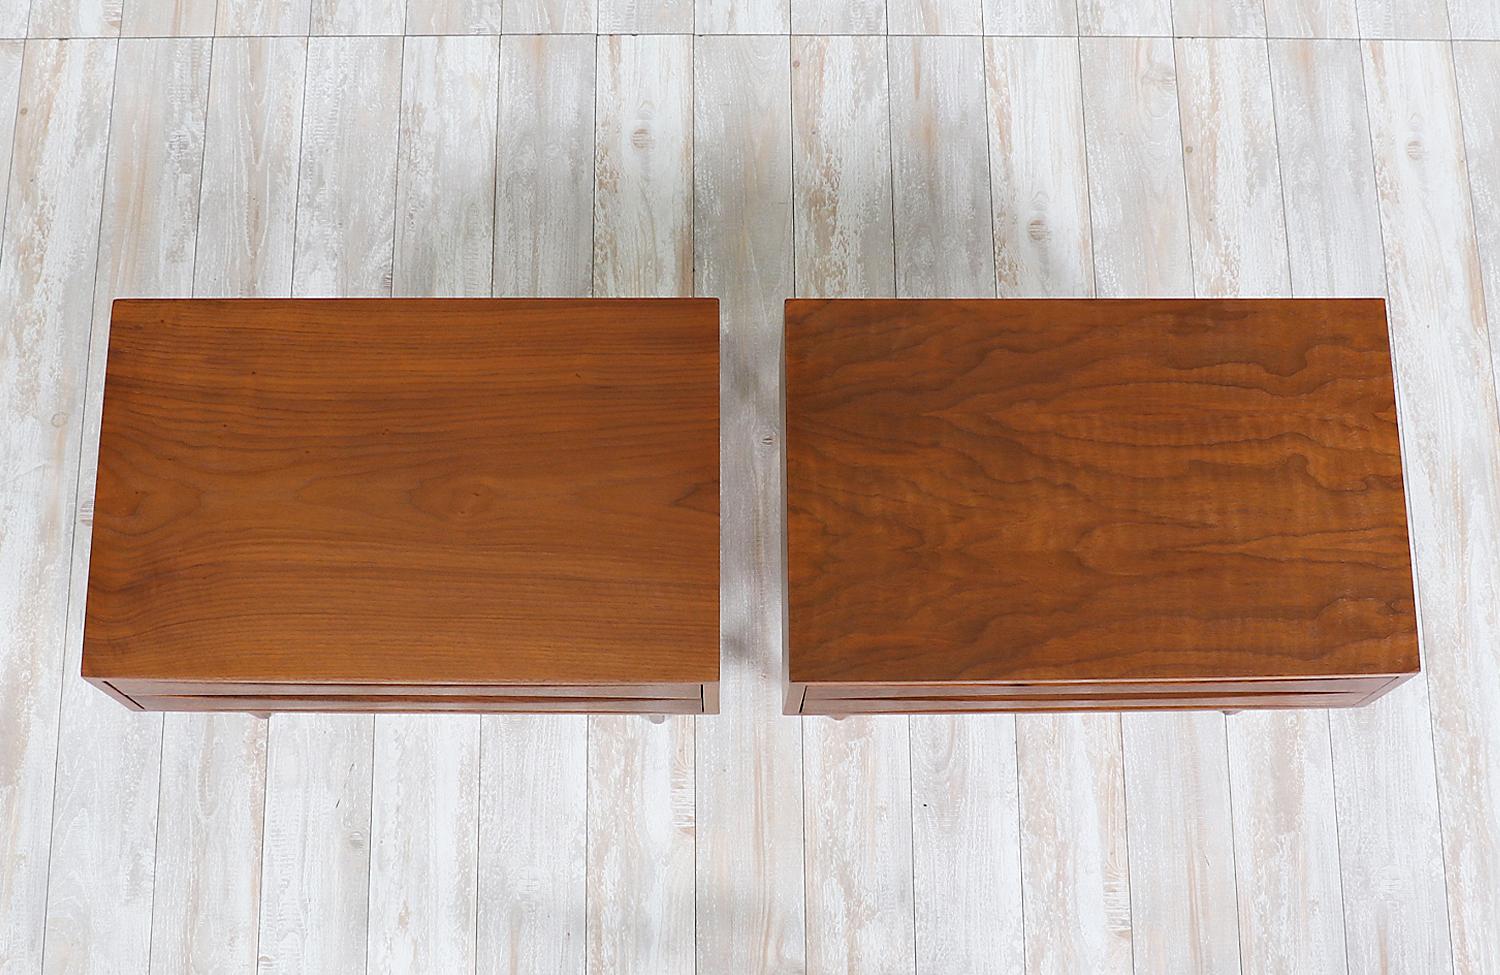 Wood Mid-Century Modern Nightstands with Lacquered Bowtie Style Drawers